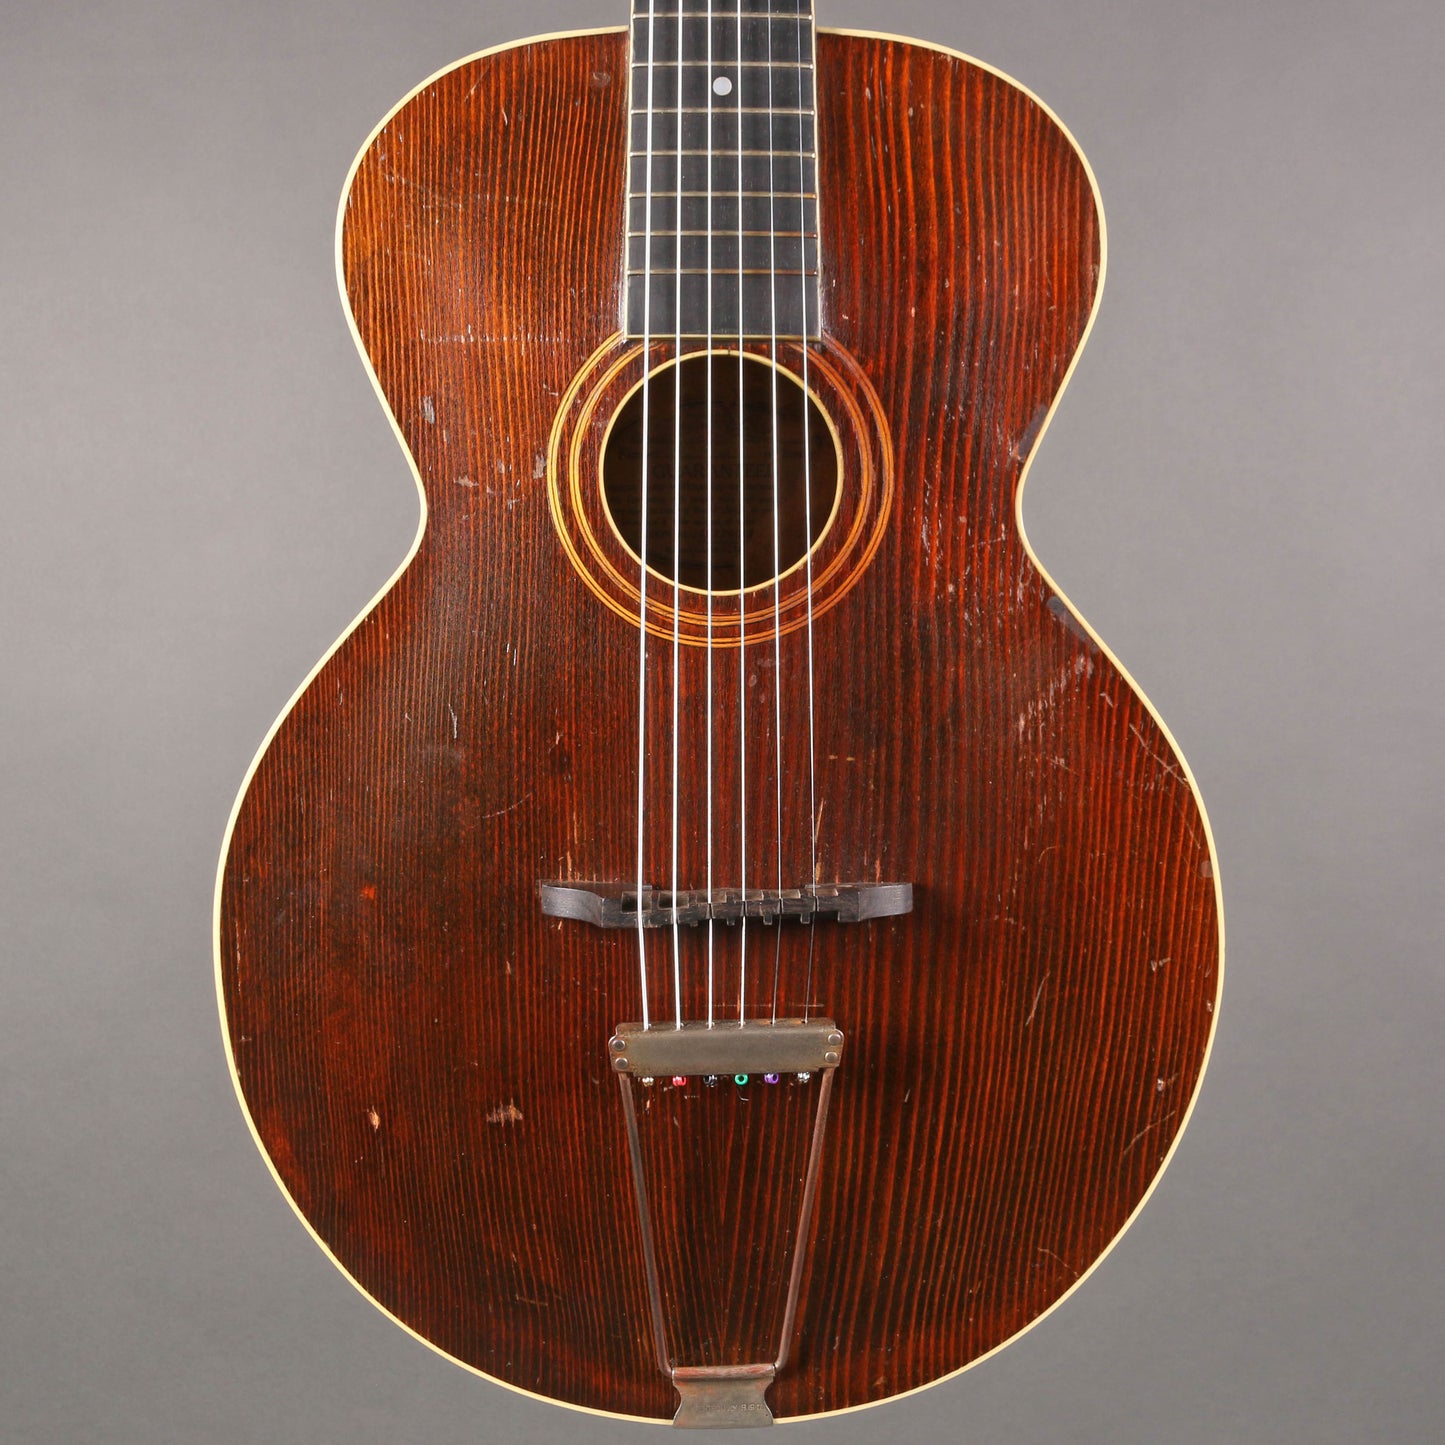 1920 Gibson L-1 “The Gibson” Archtop Acoustic